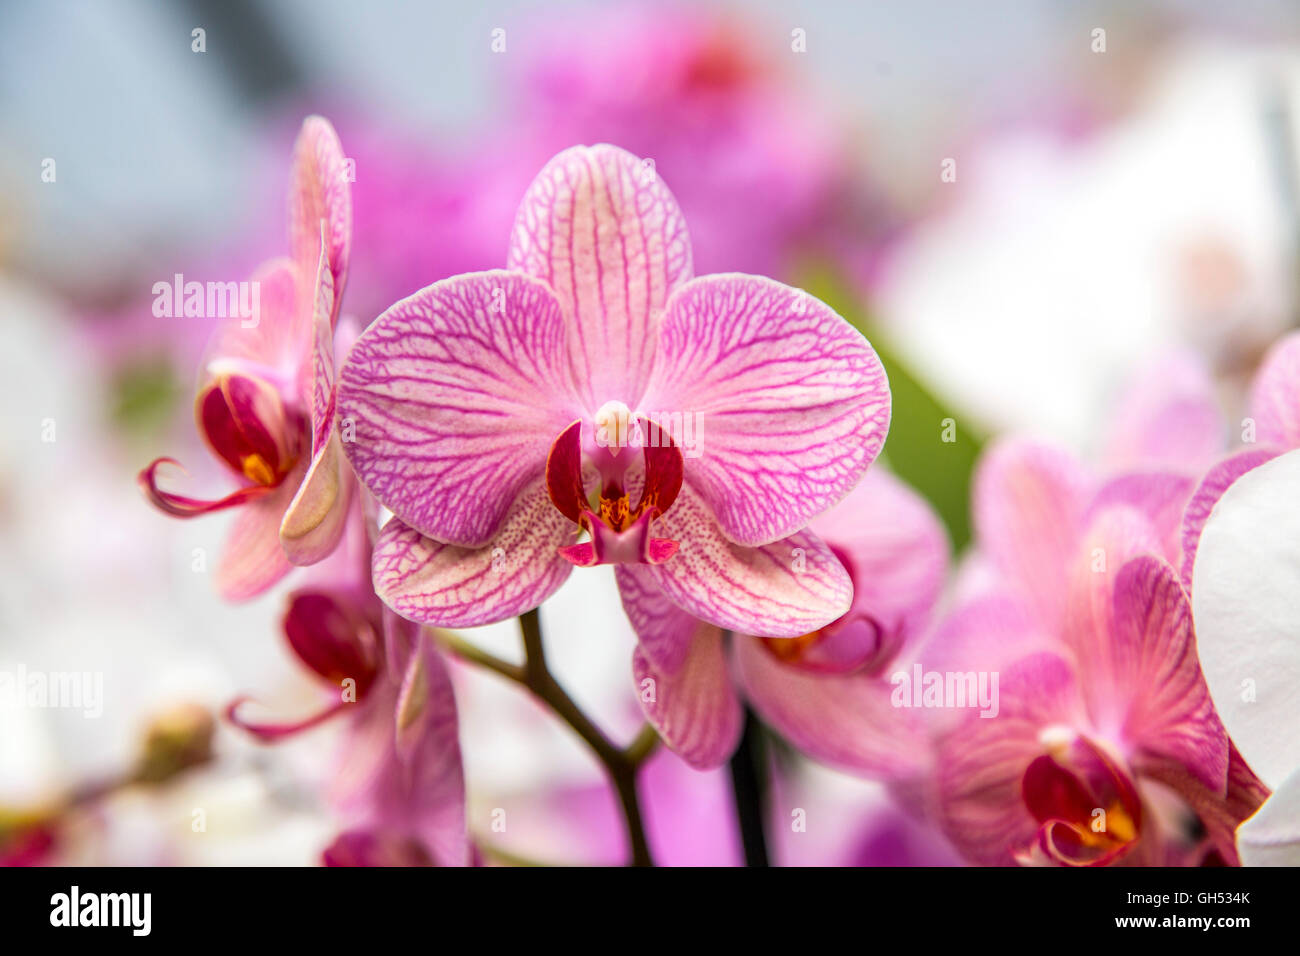 Lily plant, flower, lily family Liliaceae, Stock Photo